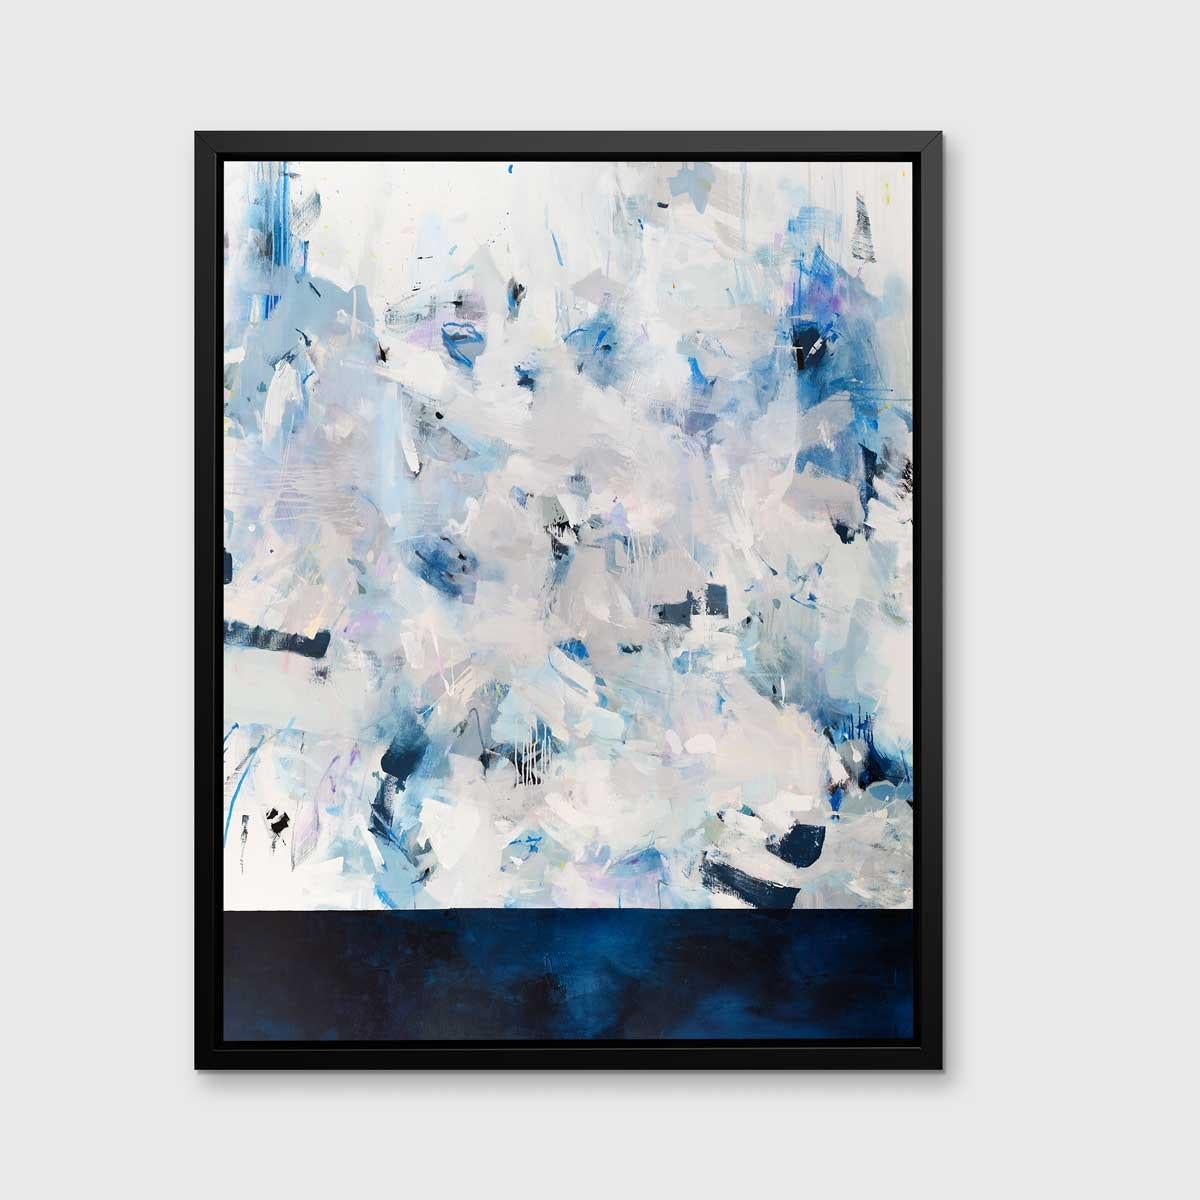 This limited edition abstract giclee print by Kelly Rossetti features a cool blue and white palette. The bottom portion of the composition is a deep, midnight blue, which is balanced by the expressive strokes in grey, white, blue, and subtle pale